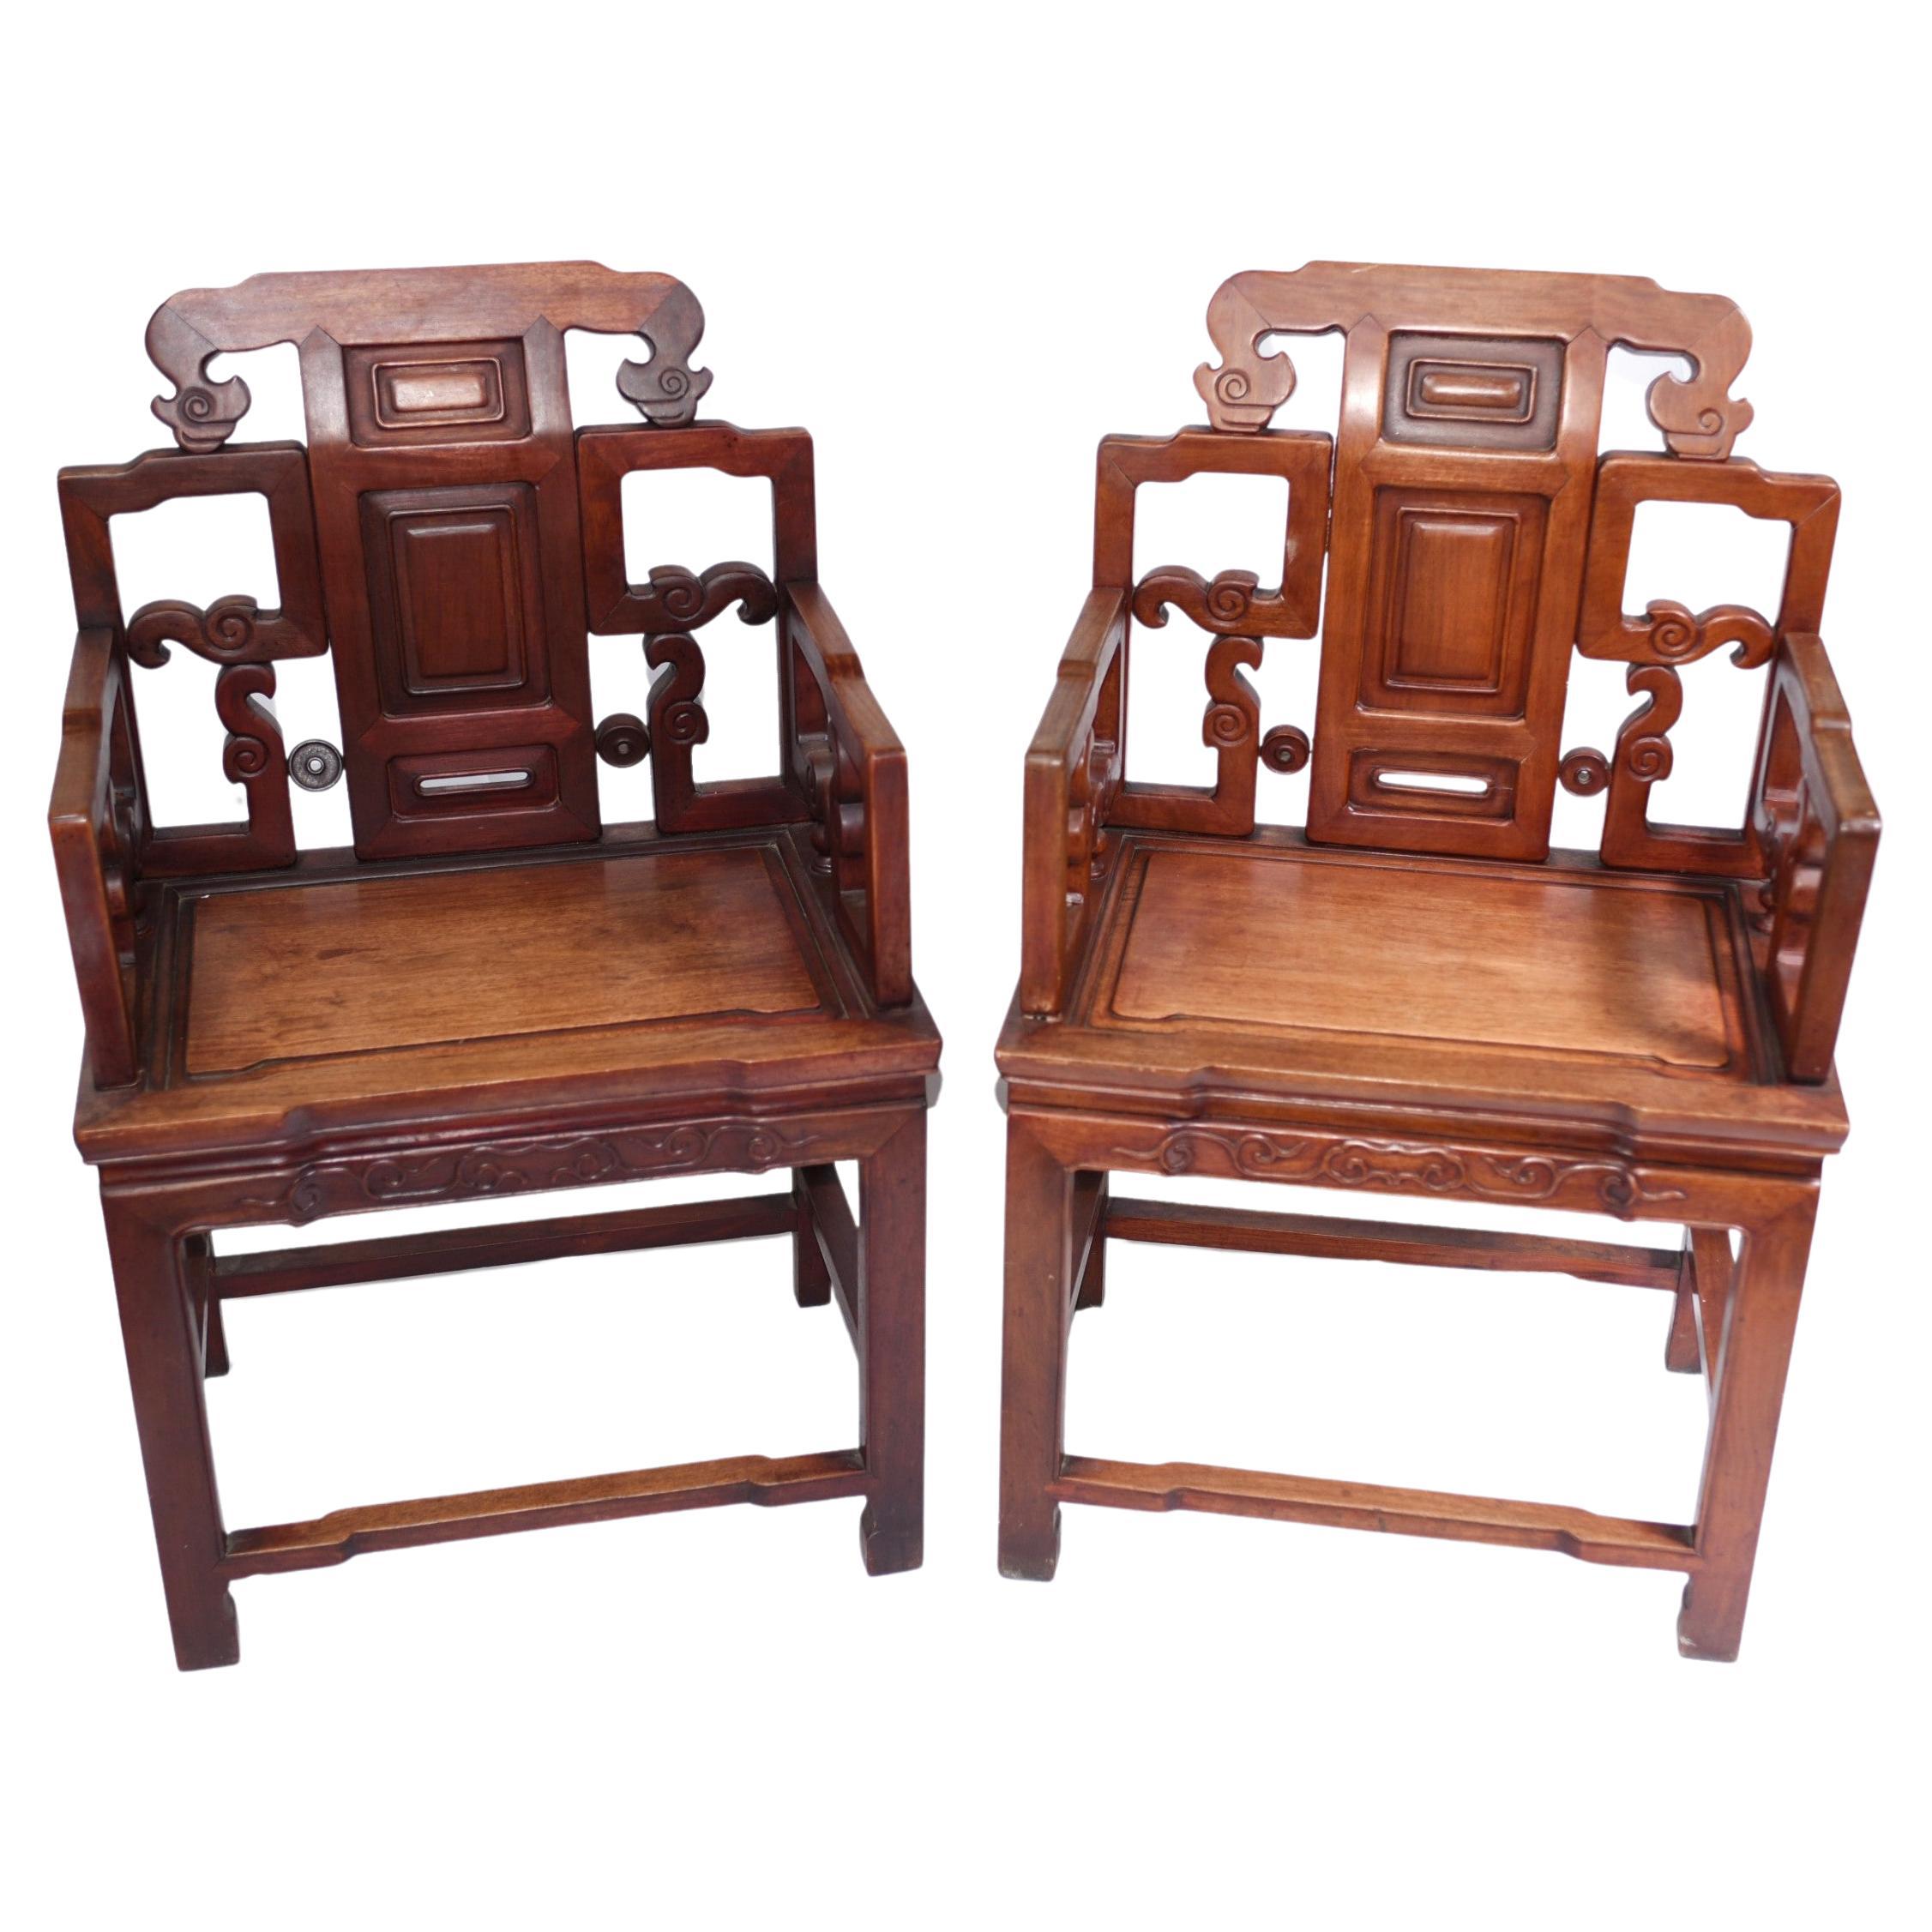 Pair Antique Chinese Arm Chairs - Hardwood Seats Interiors For Sale